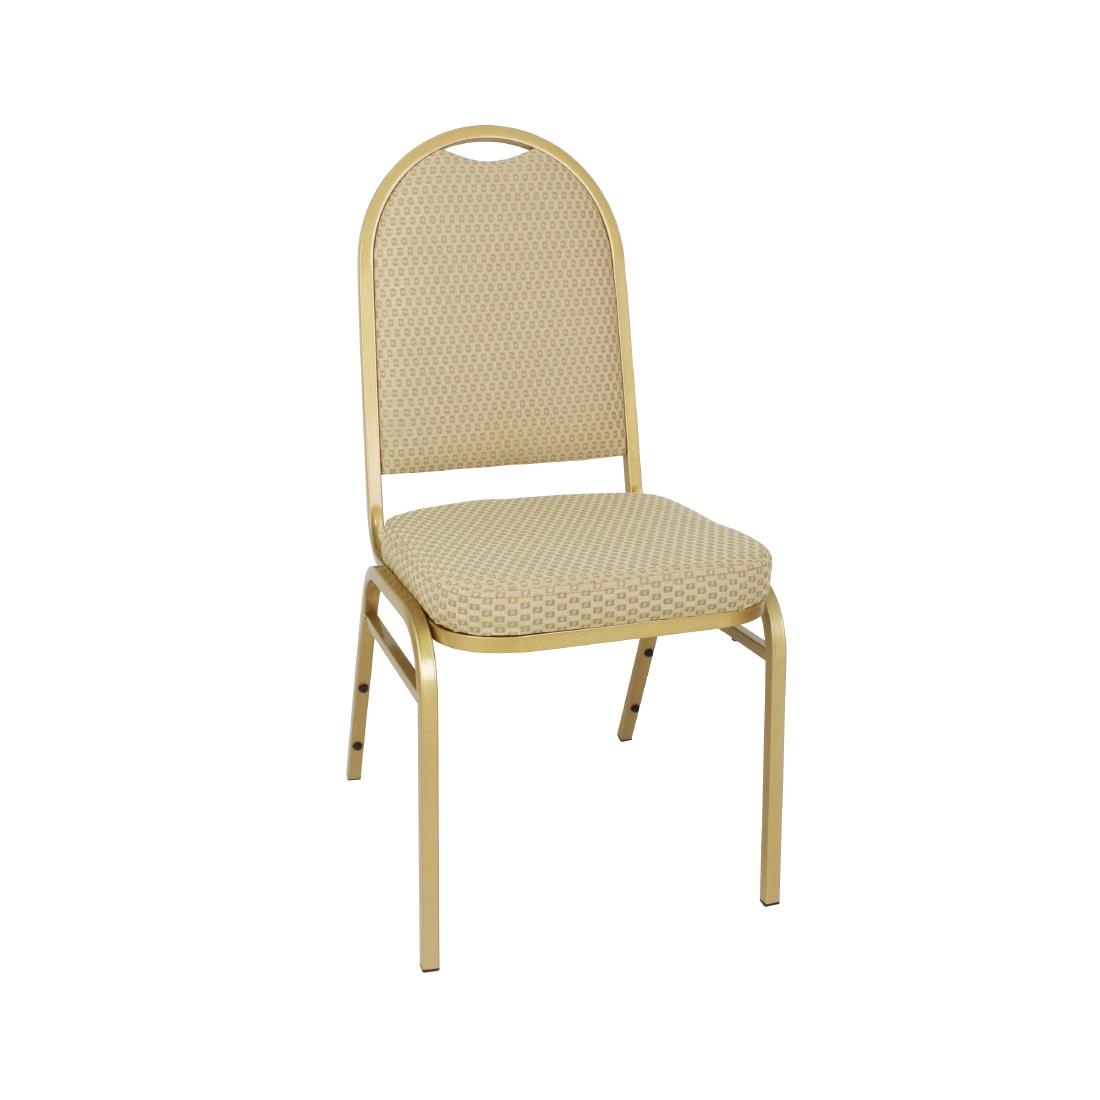 Rounded Back Banqueting Chair - Neutral